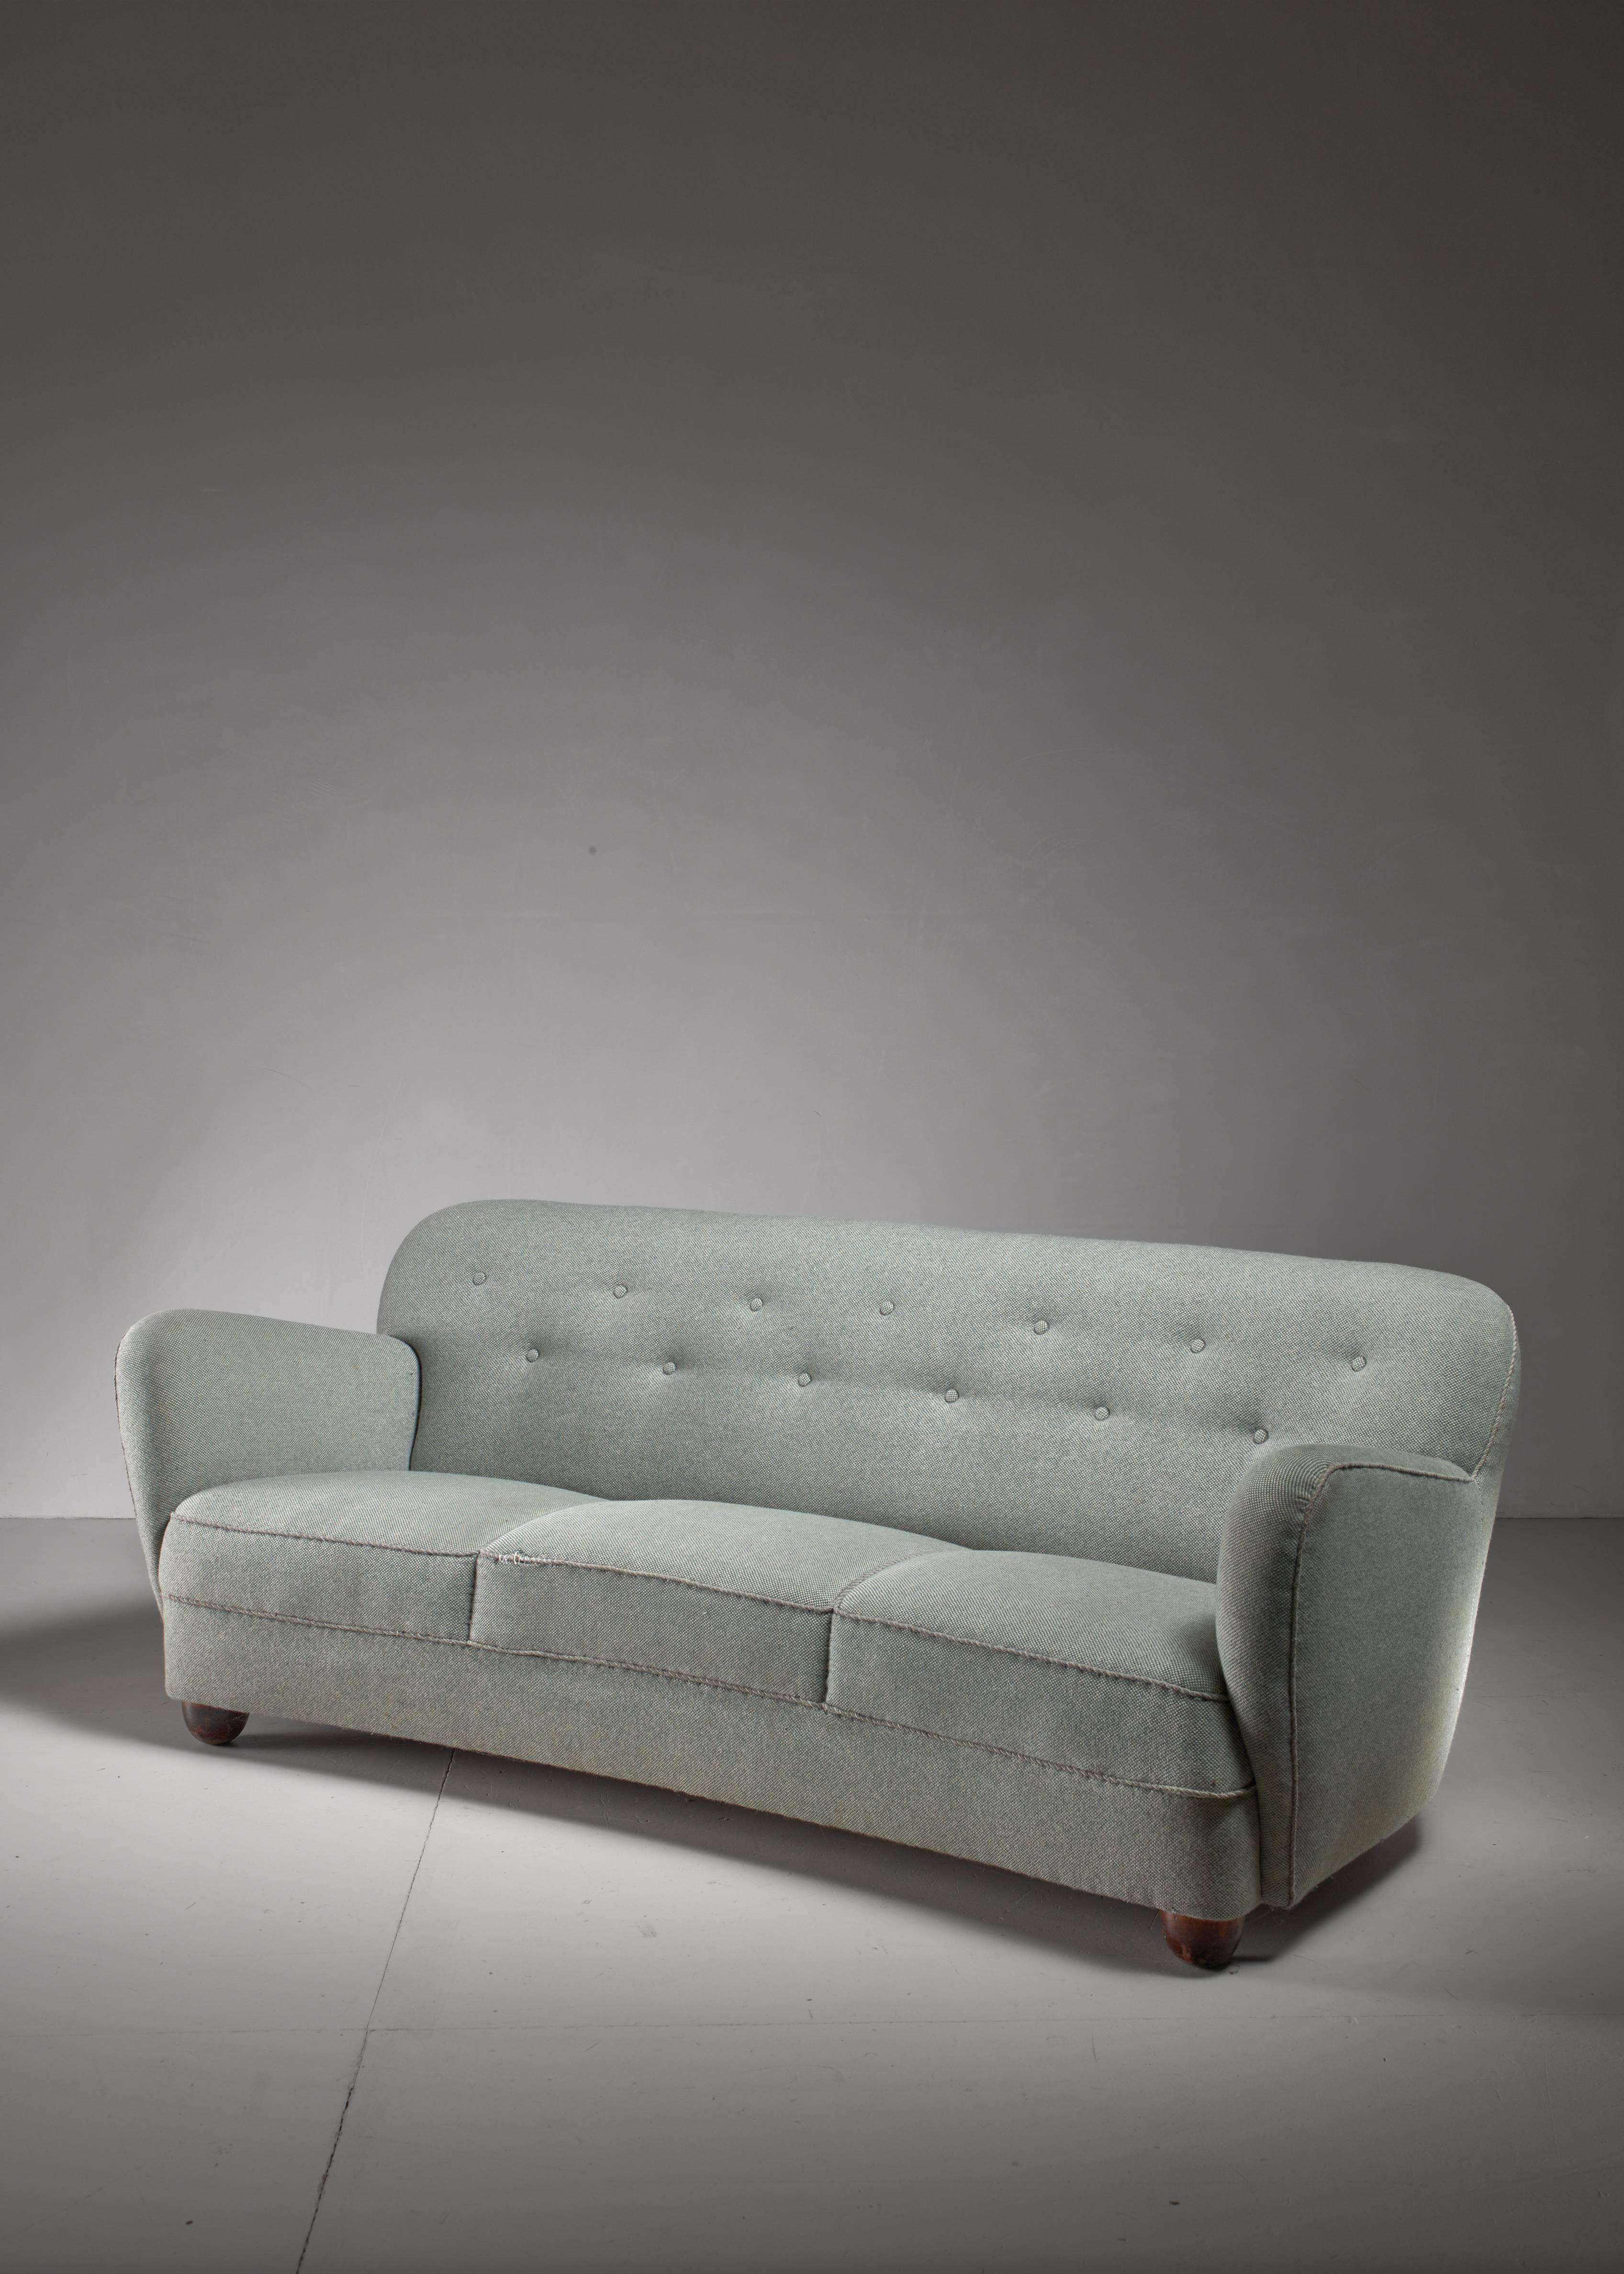 A slightly curved, three-seat sofa, standing on oak legs, round in the front and rectangular in the back. The sofa has a light blue fabric upholstery with a buttoned backrest. Structurally the sofa is in an excellent condition, but the fabric shows